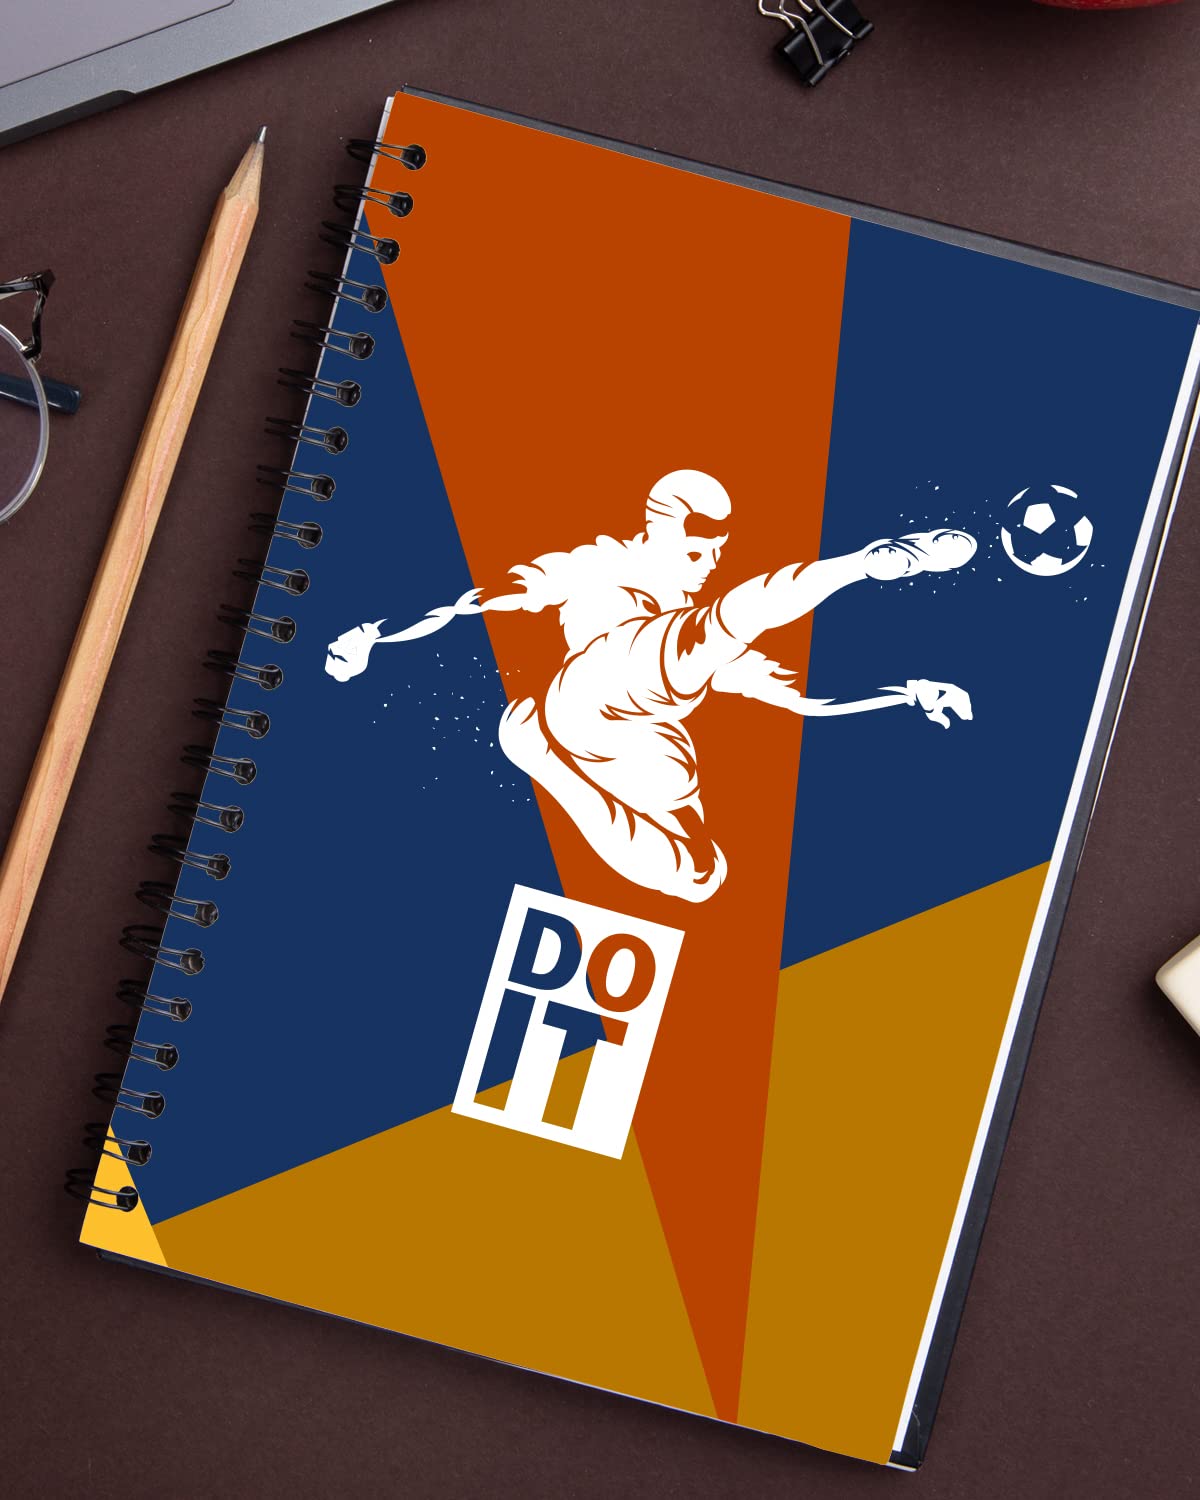 Sports Lover's Do It Spiral Notebook